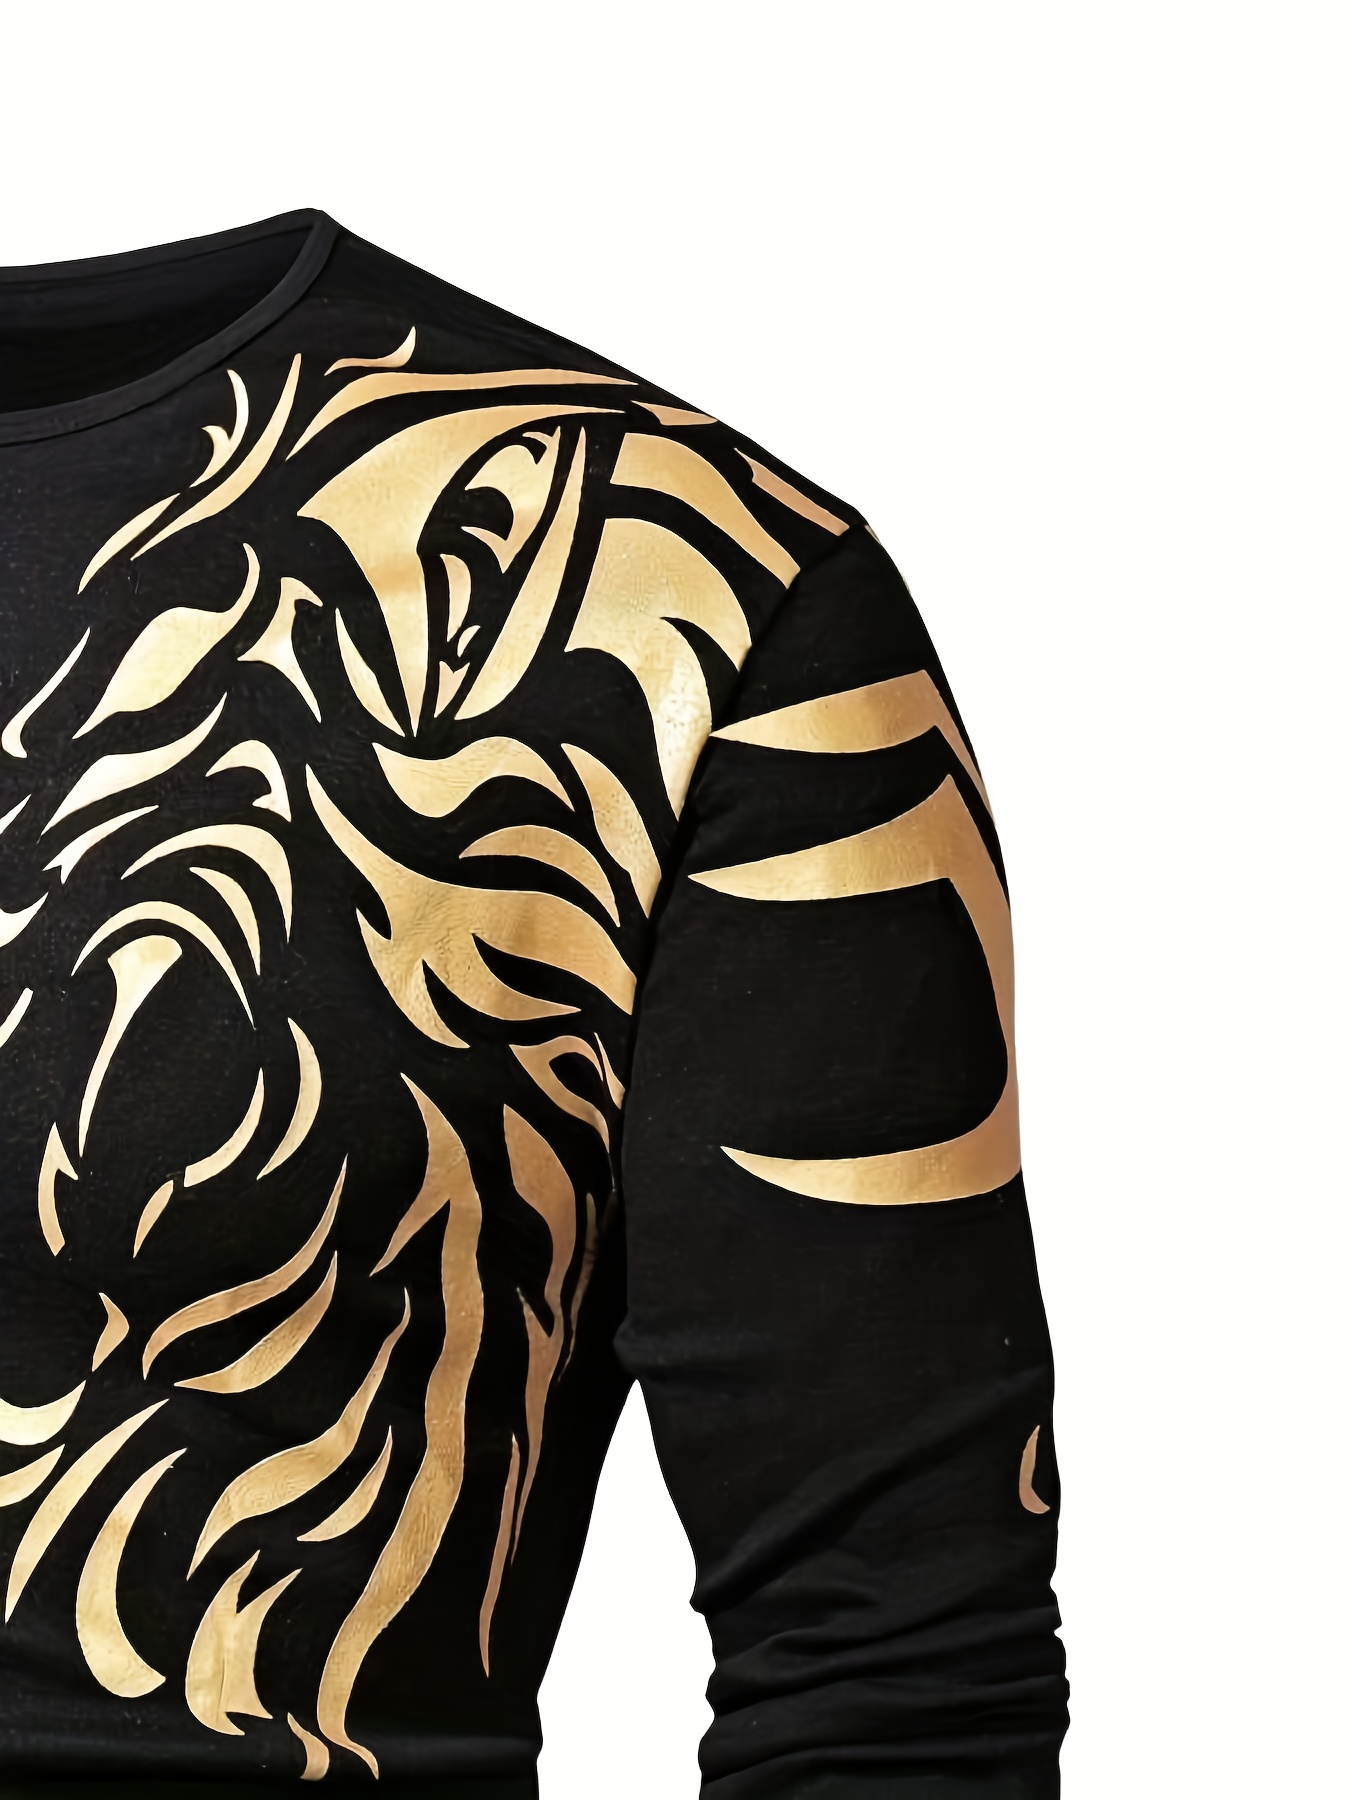 Men's Trendy Golden Tiger Print Long Sleeve T-Shirt Sports Tees Oversized Tops for Spring & Autumn for Big & Tall Males, Plus Size,Temu